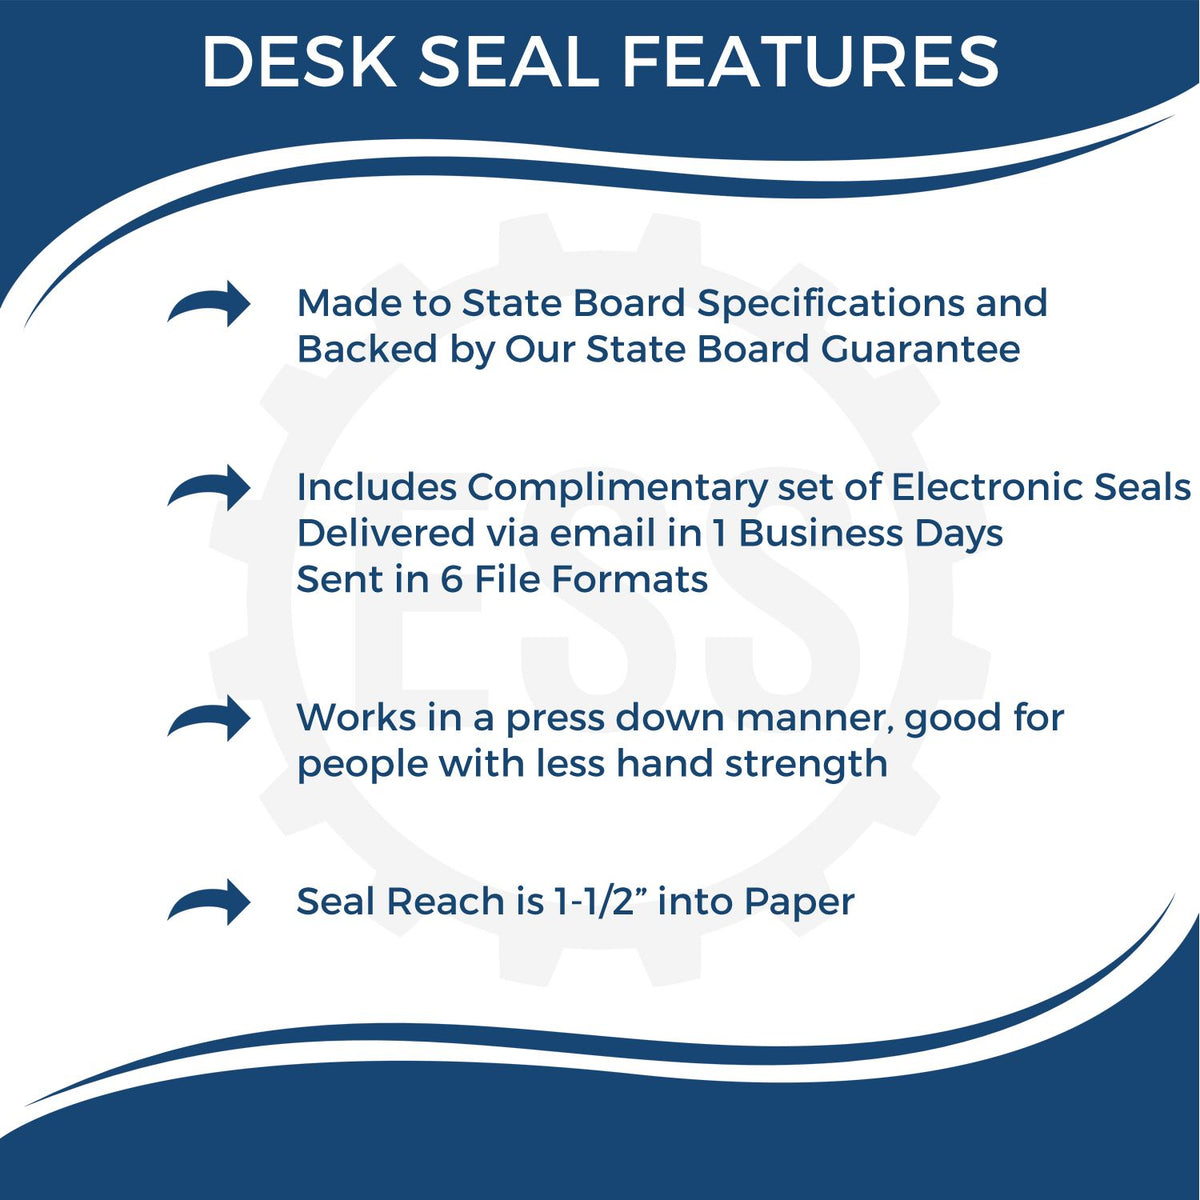 A picture of an infographic highlighting the selling points for the New Hampshire Engineer Desk Seal